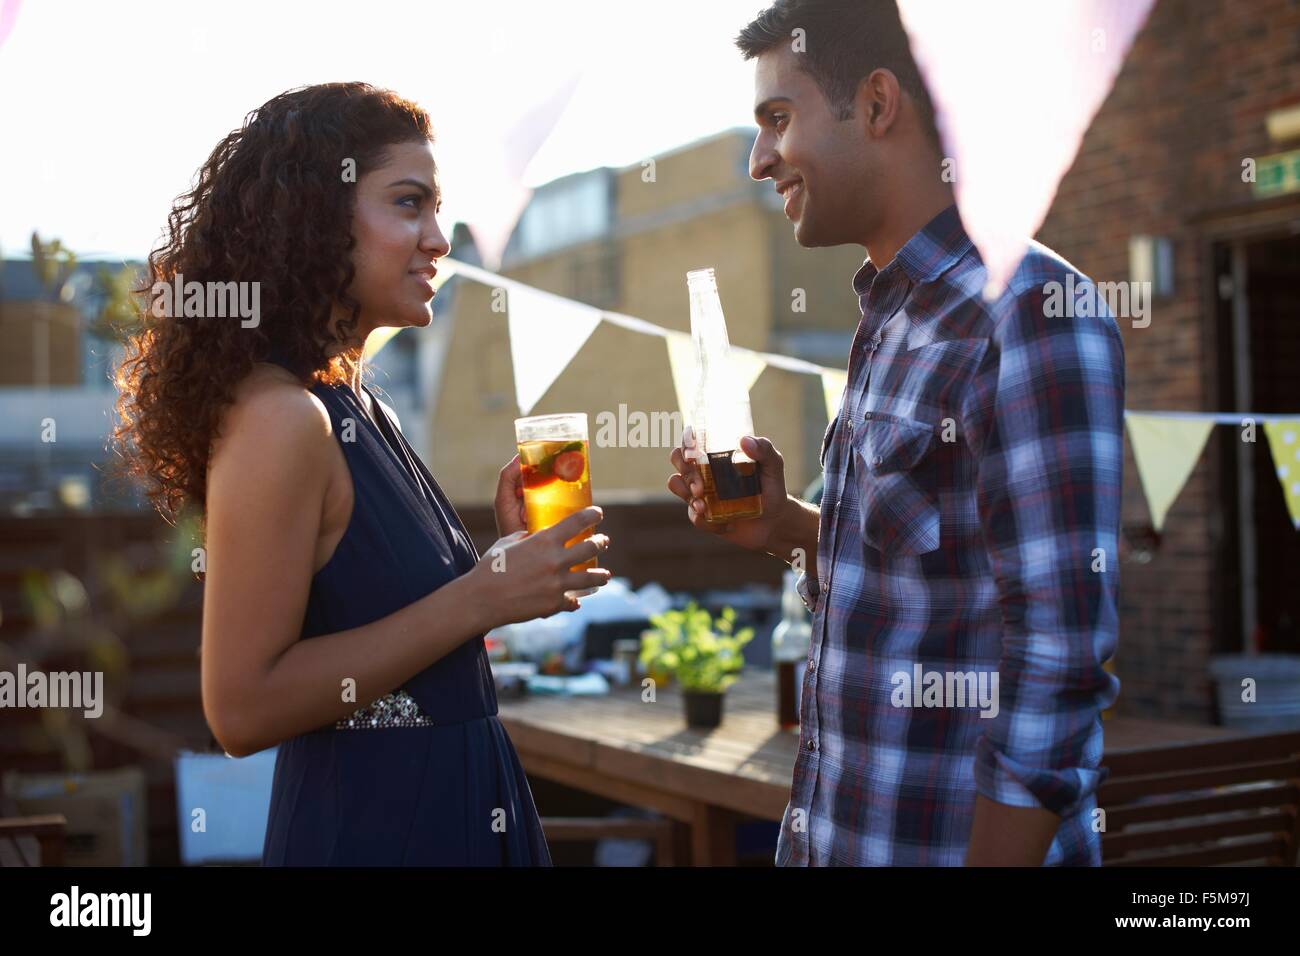 Couple at early evening party Stock Photo